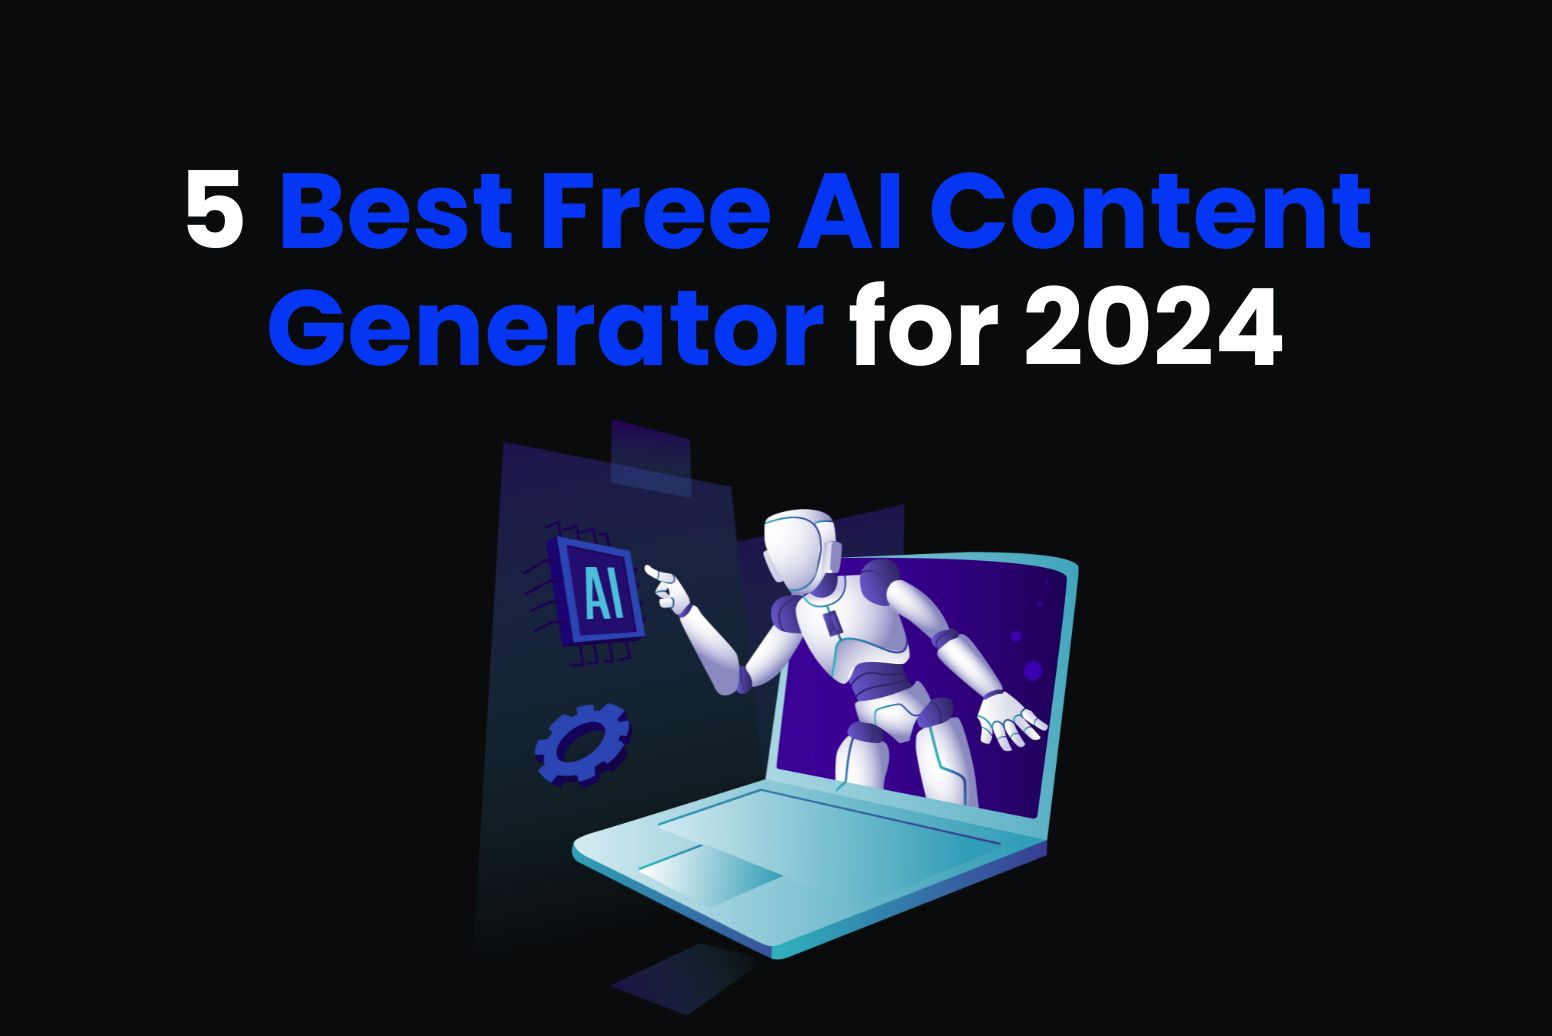 5 Best Free AI Content Generator for 2024